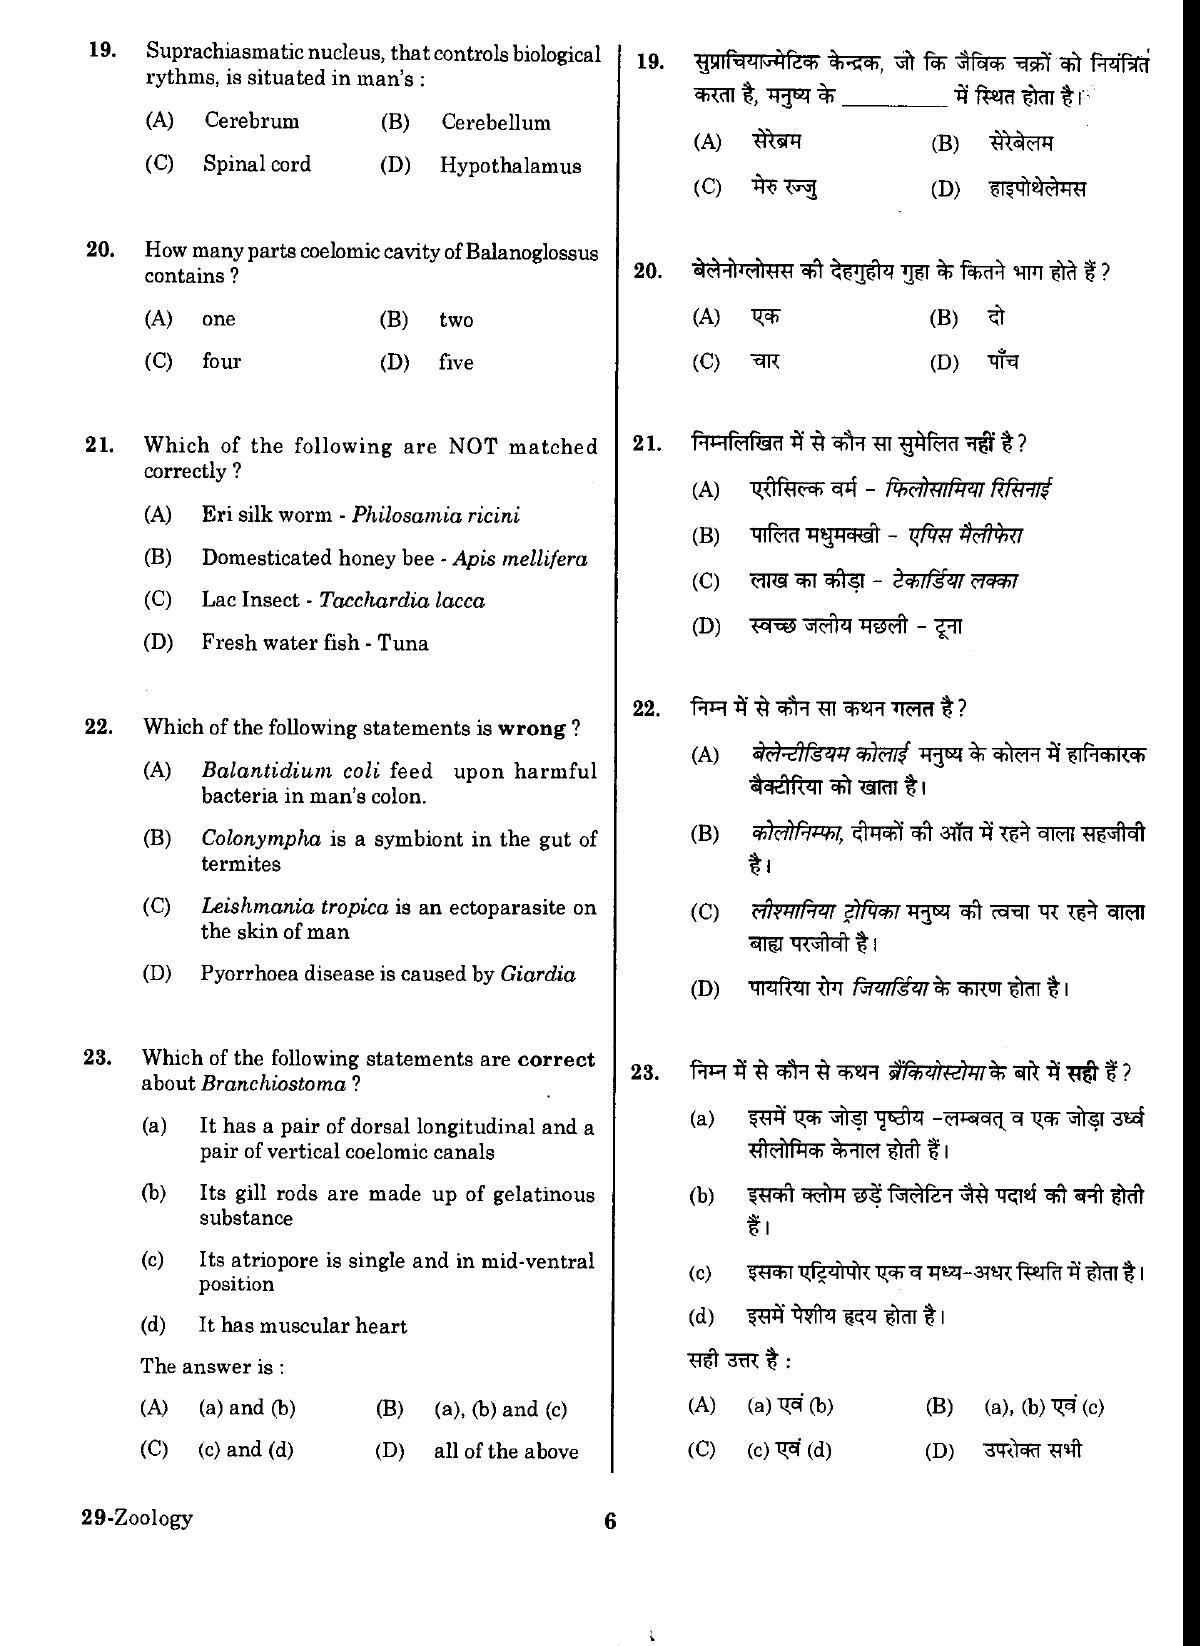 URATPG Zoology Sample Question Paper 2018 - Page 5